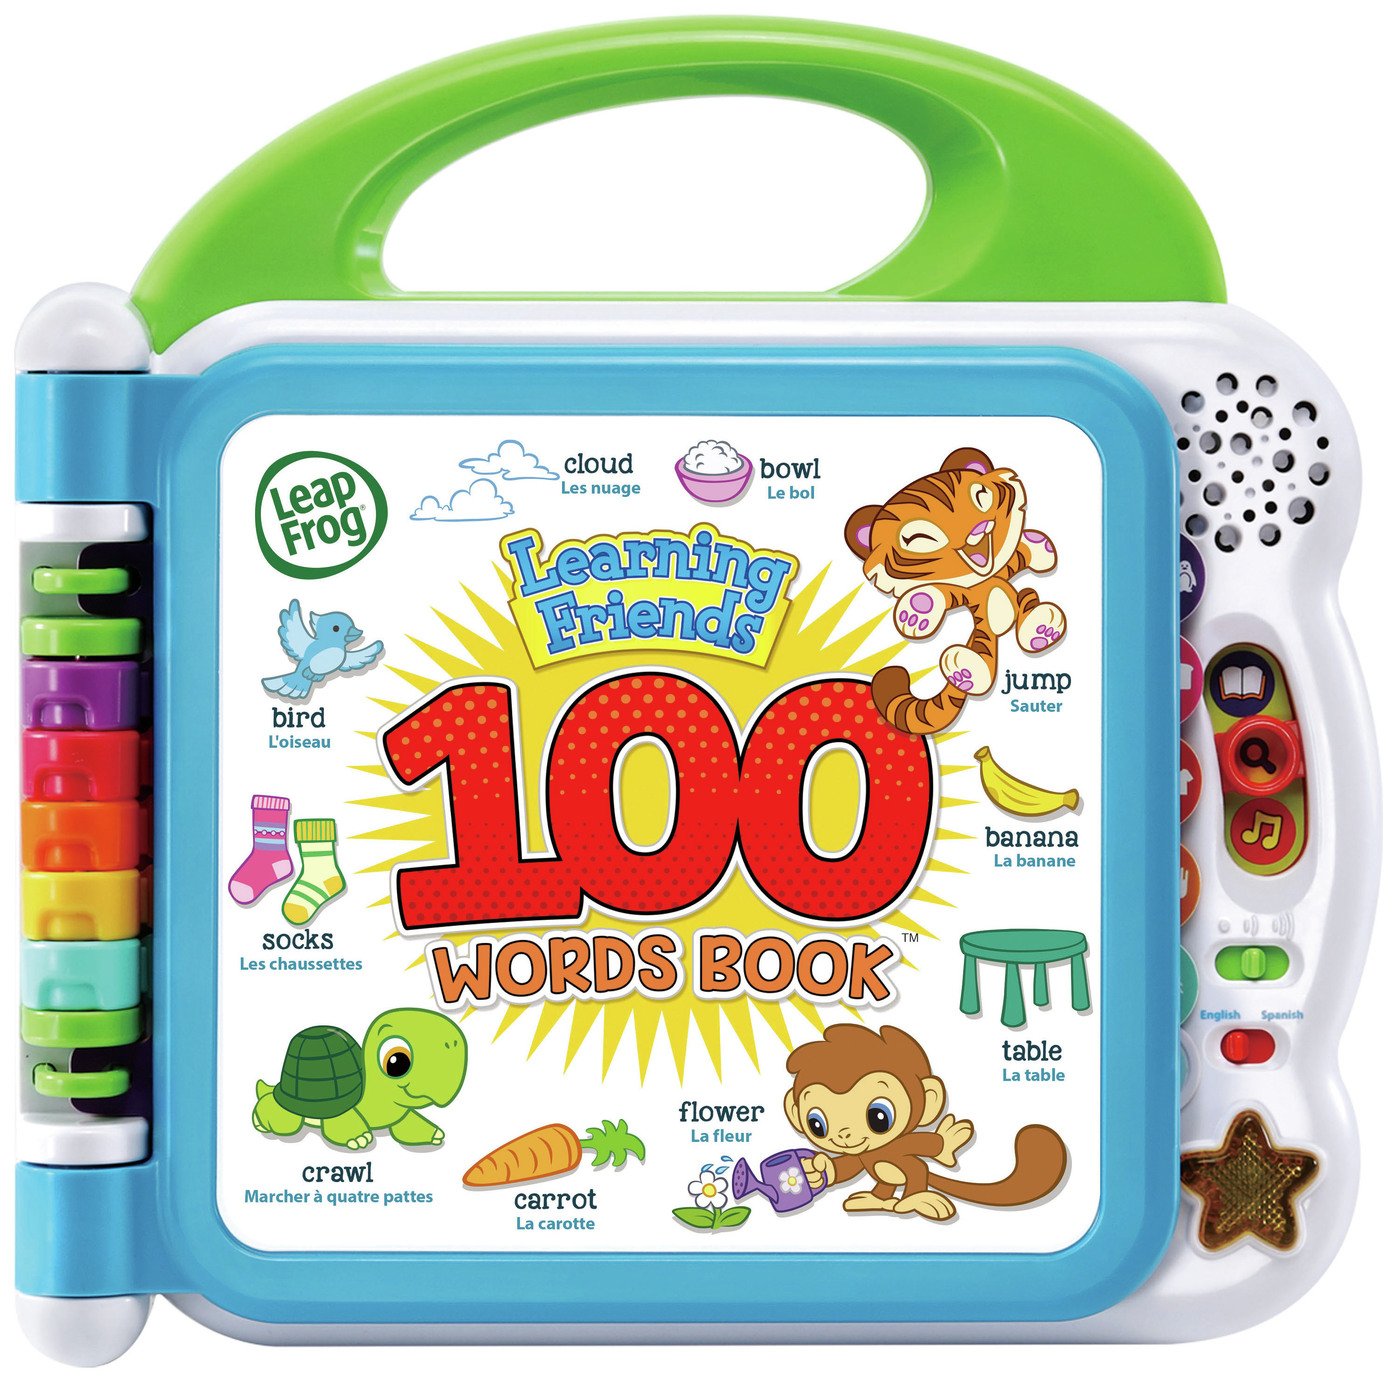 LeapFrog Learning Friends 100 Words Book Review